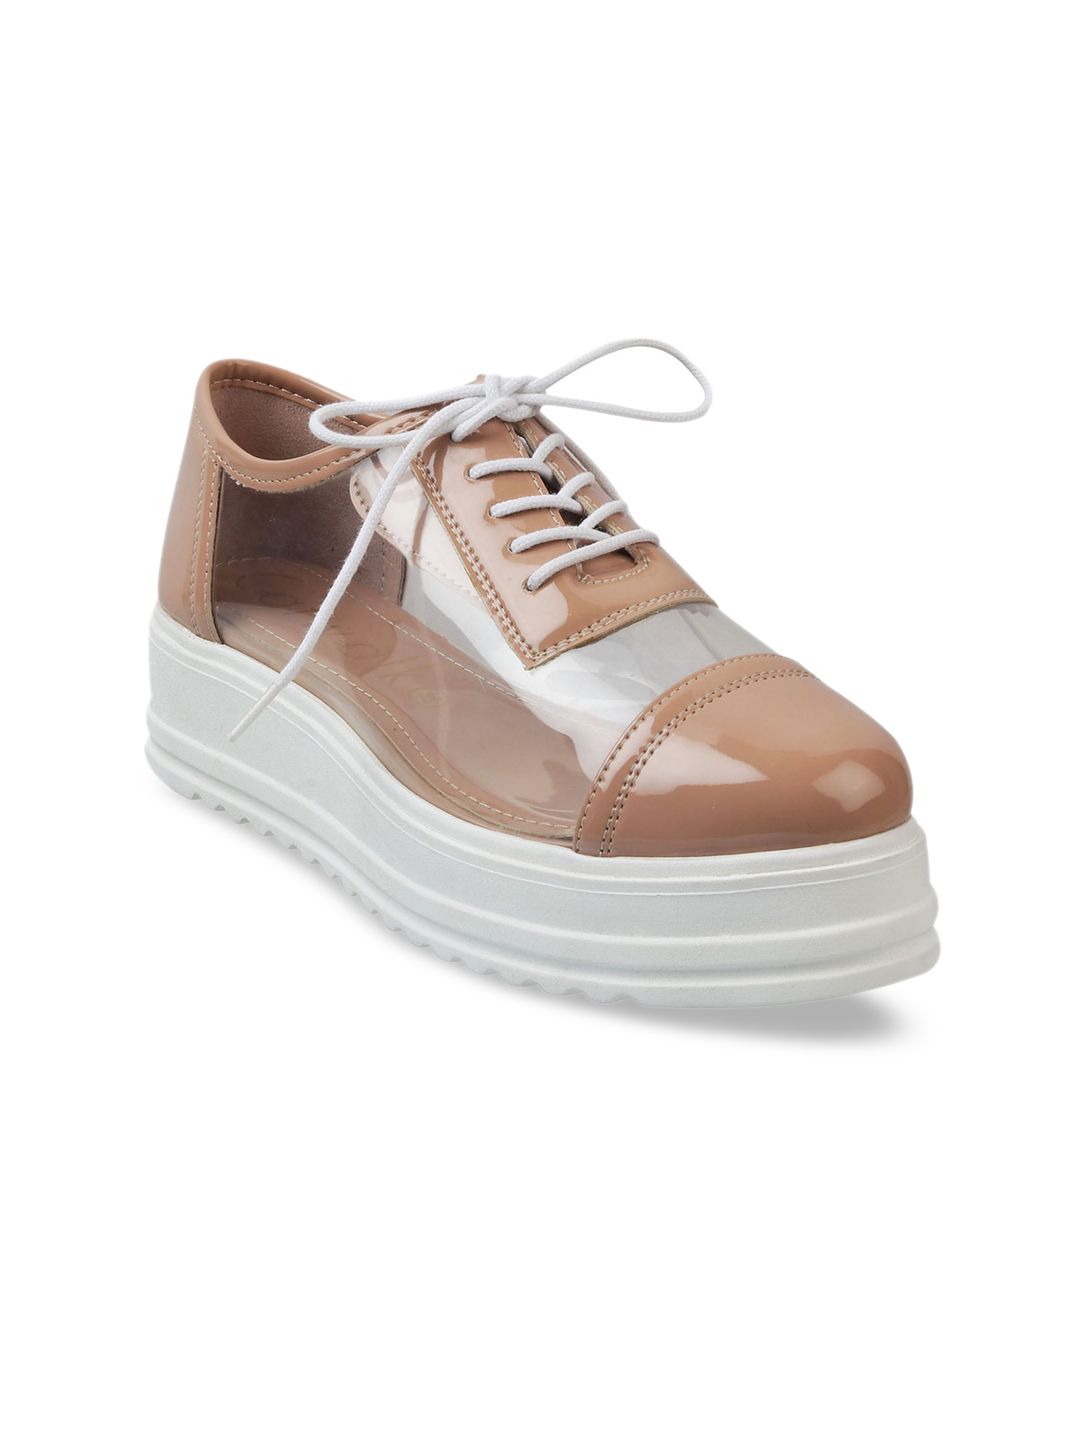 Catwalk Women Nude-Coloured Colourblocked Sneakers Price in India